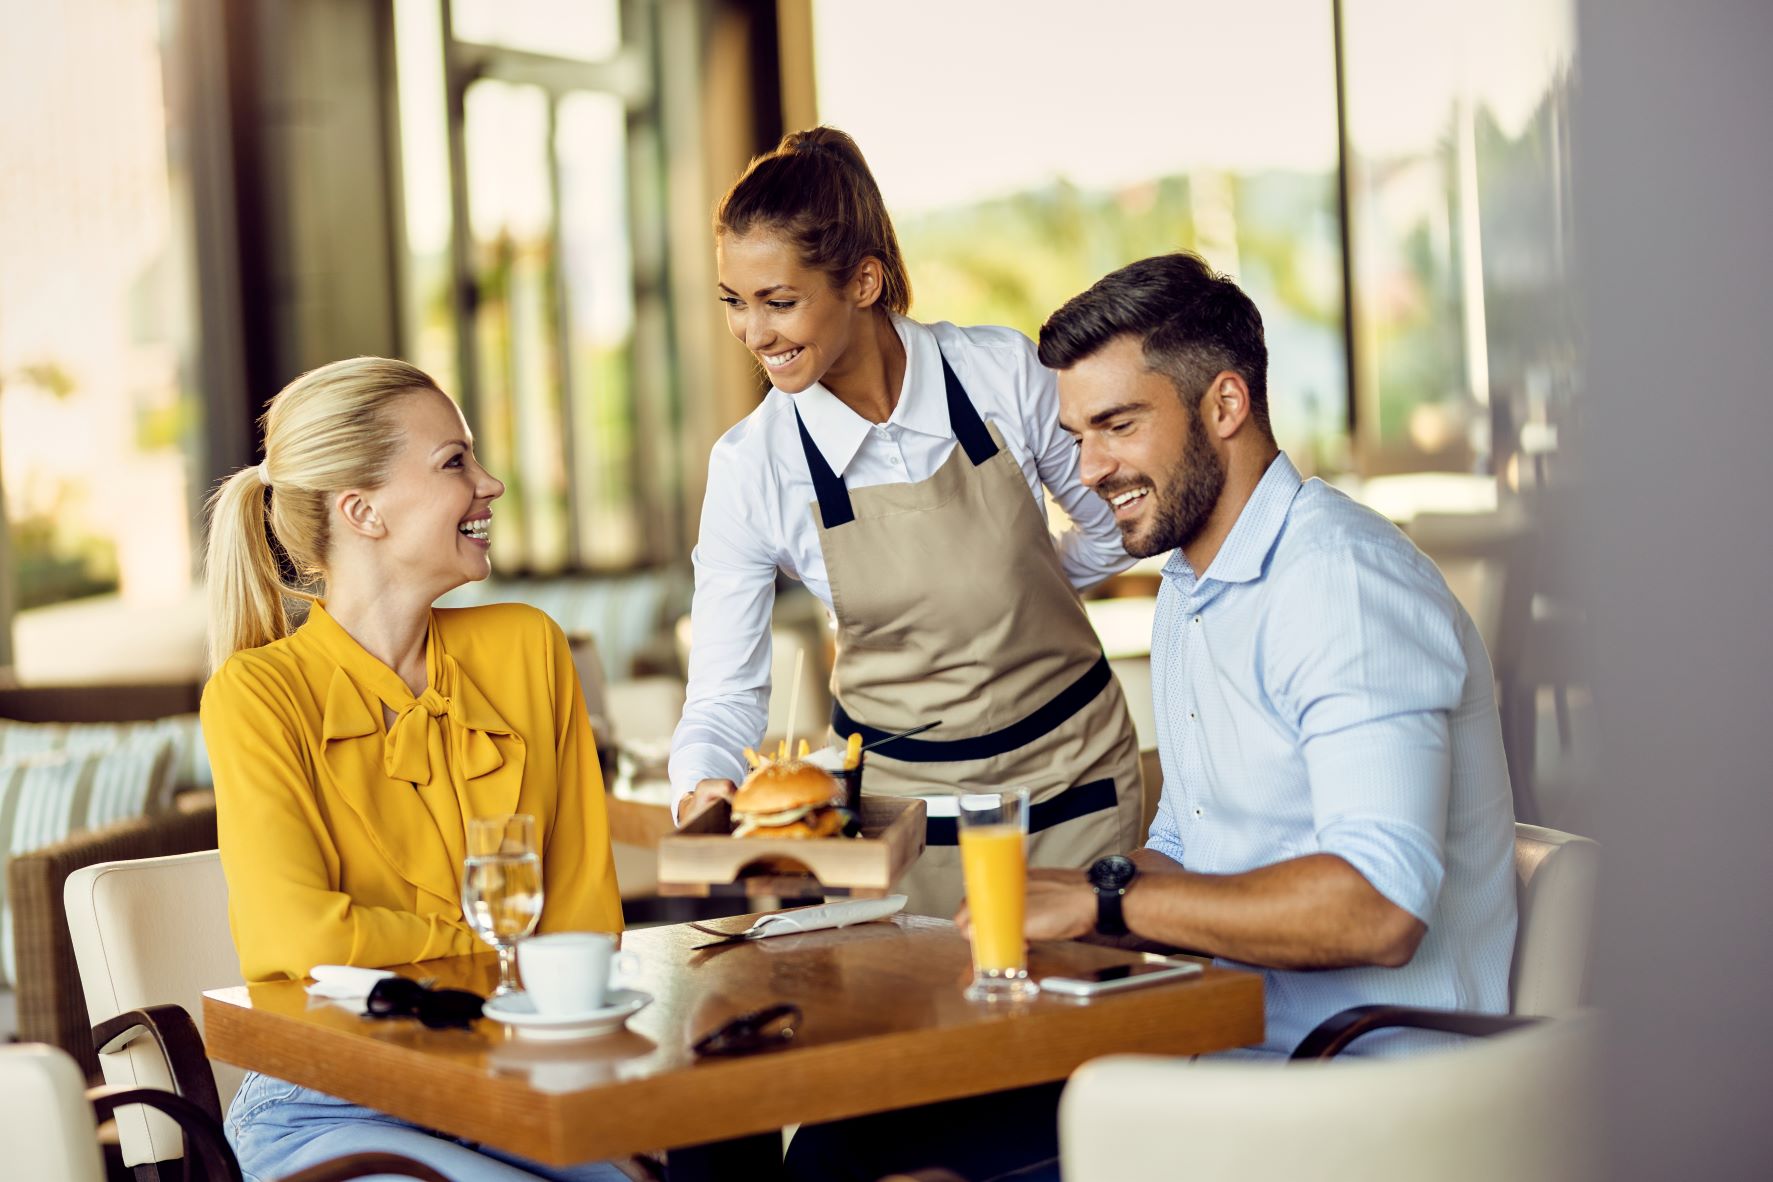 How to Increase Engagement With Restaurant Guests